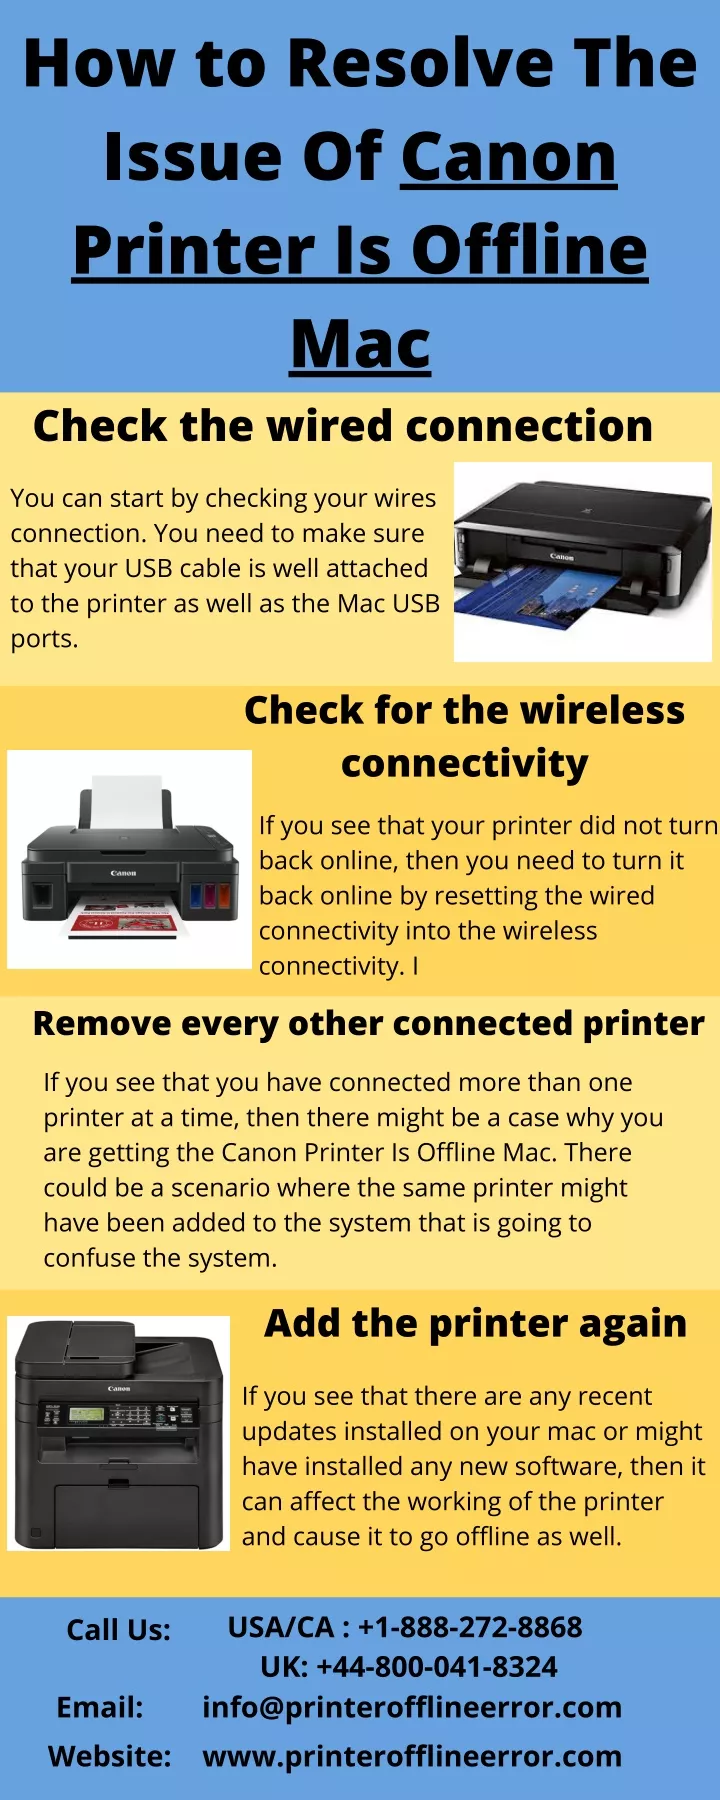 how to resolve the issue of canon printer